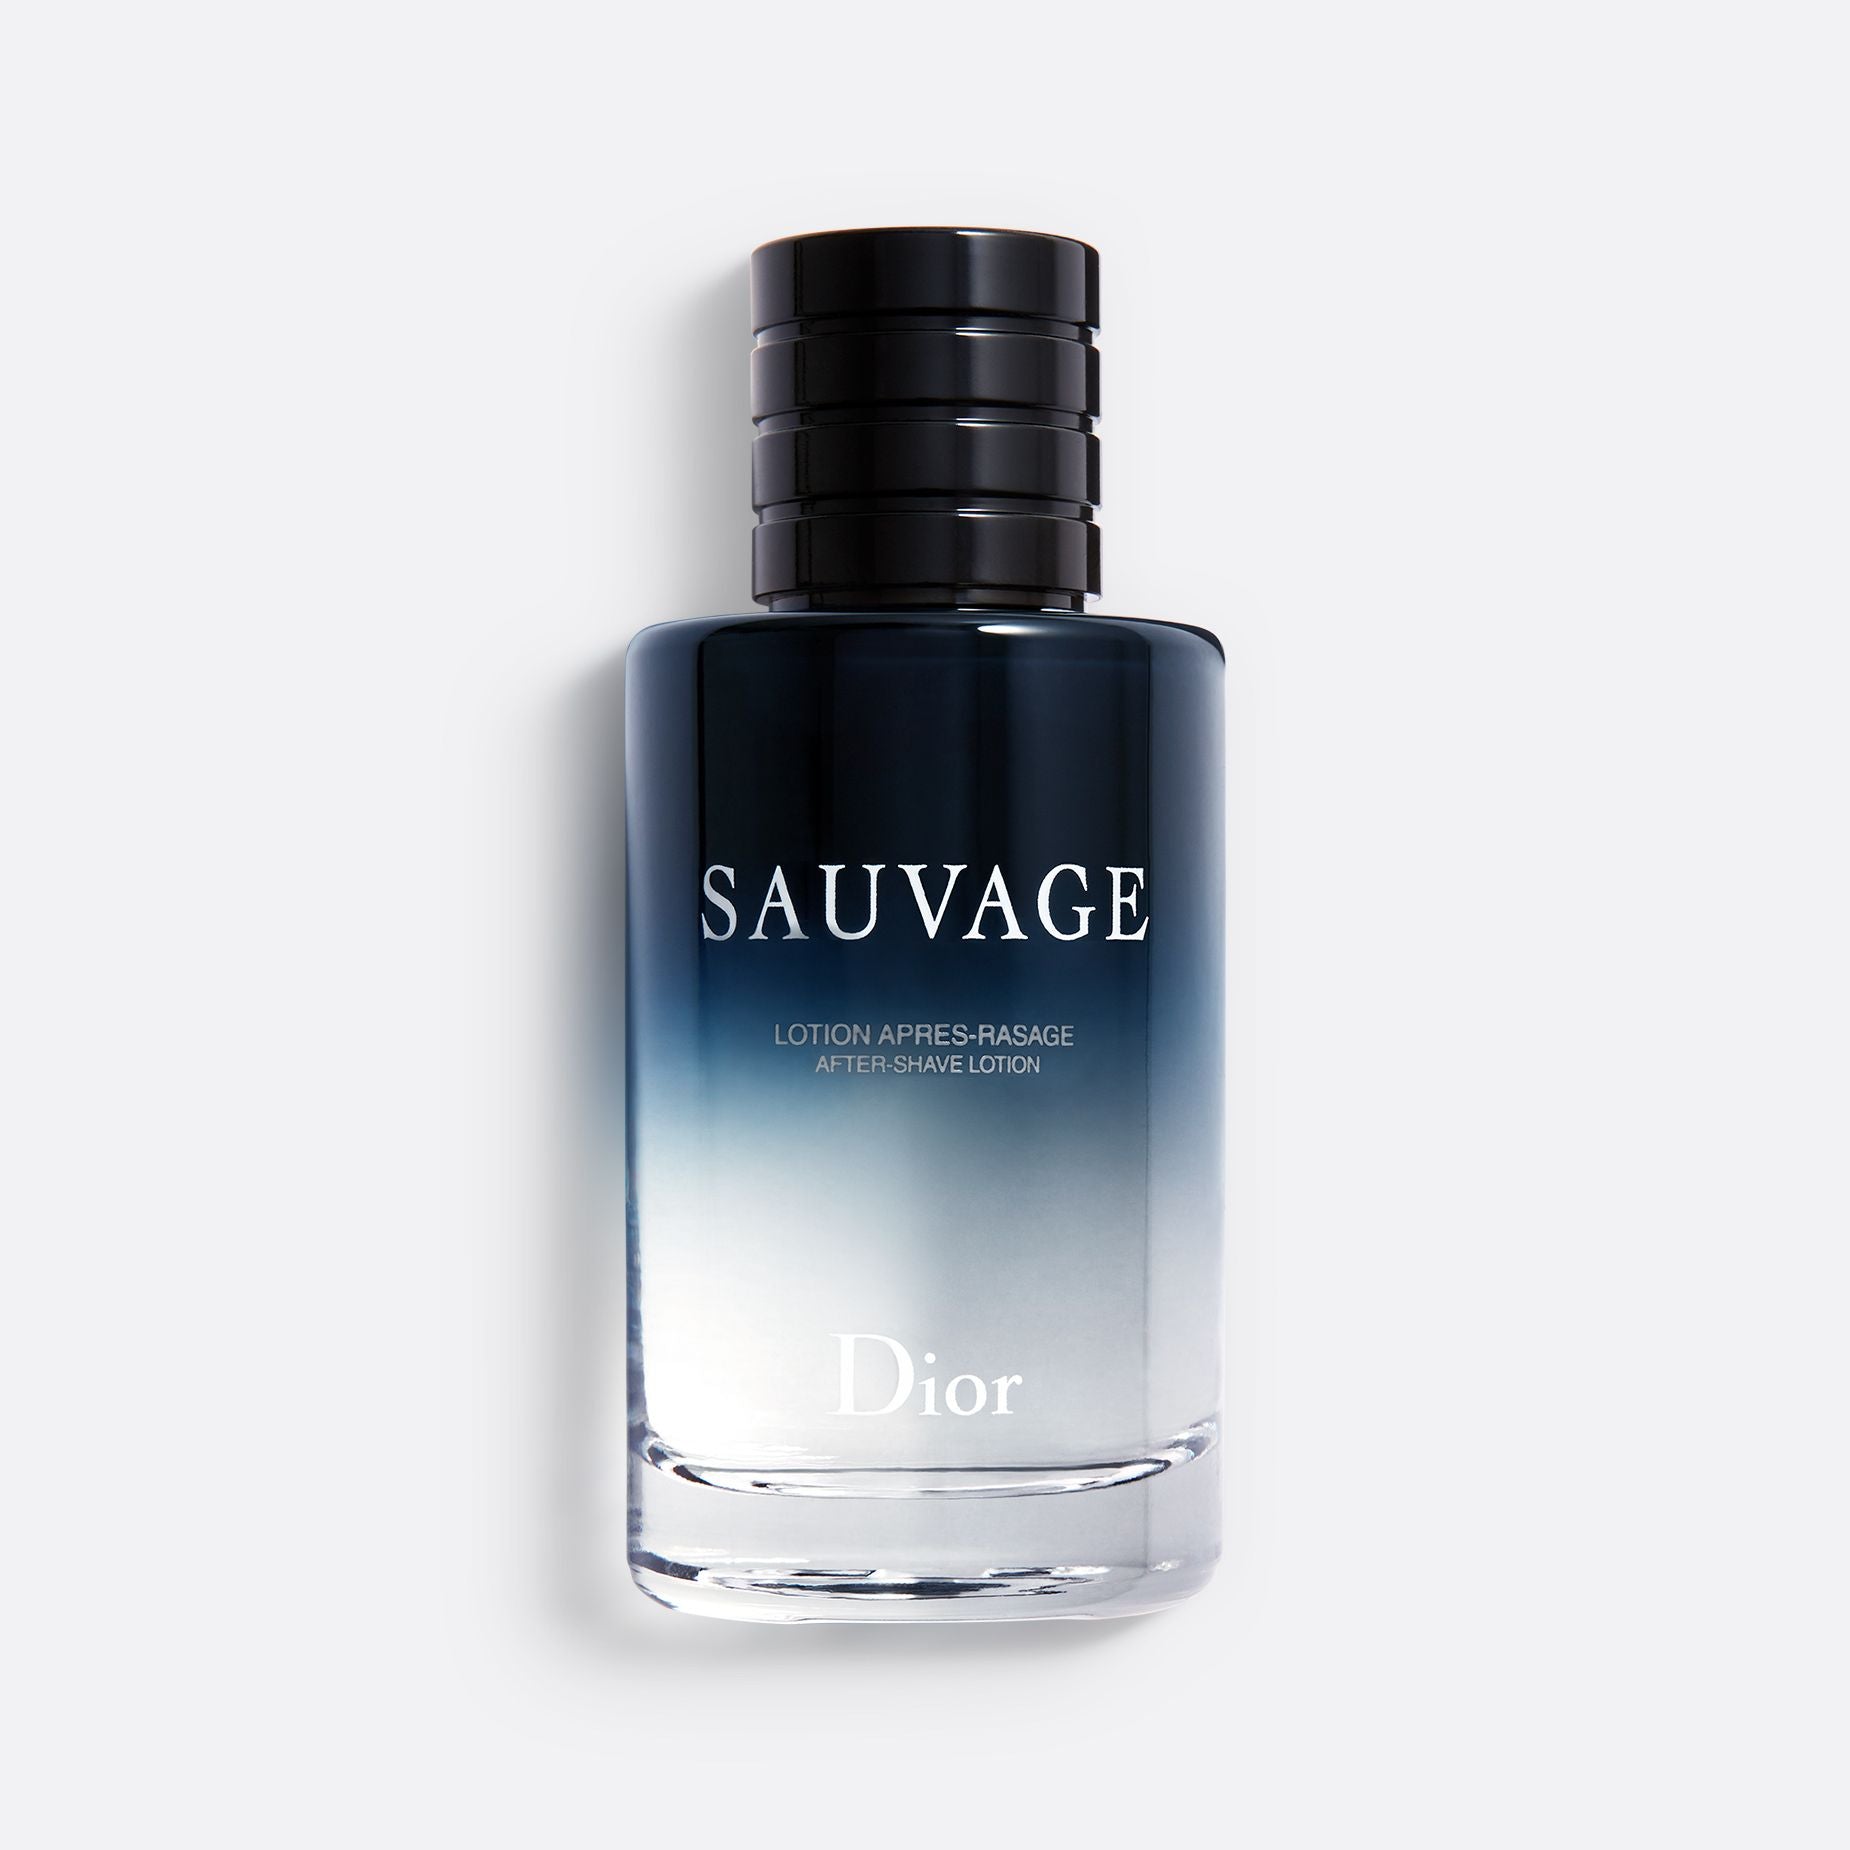 SAUVAGE ~ After-shave lotion